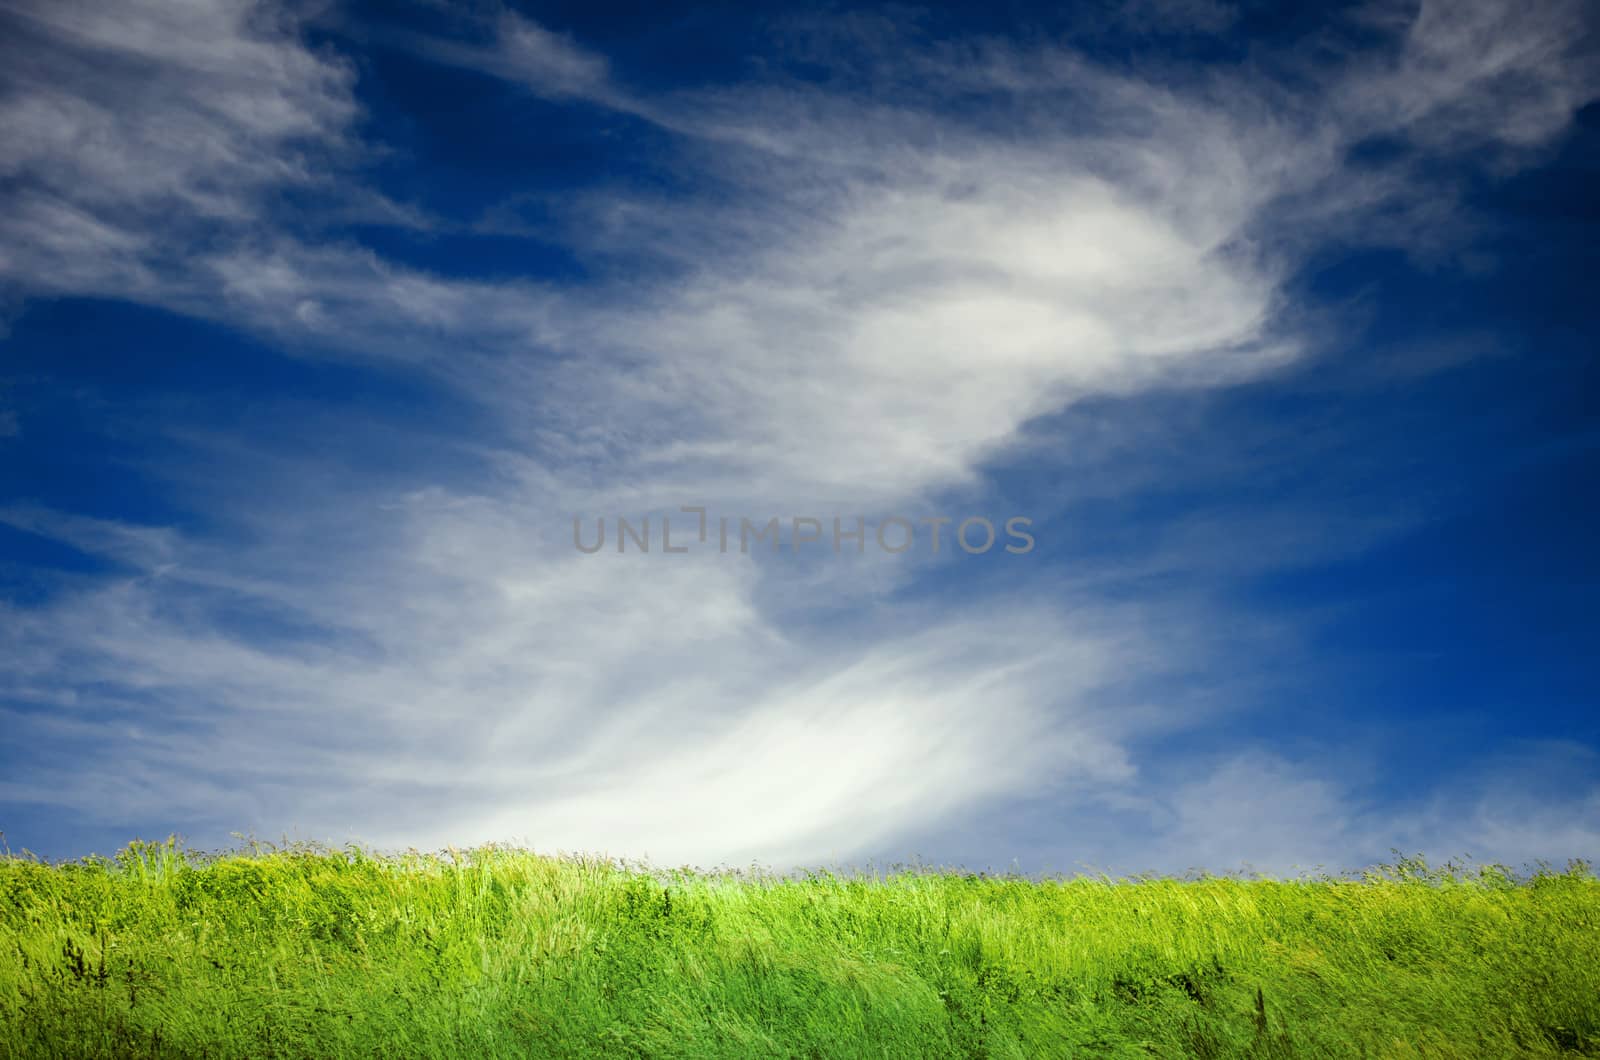 Beautiful landscape with green grass lawn and slightly cloudy blue sky